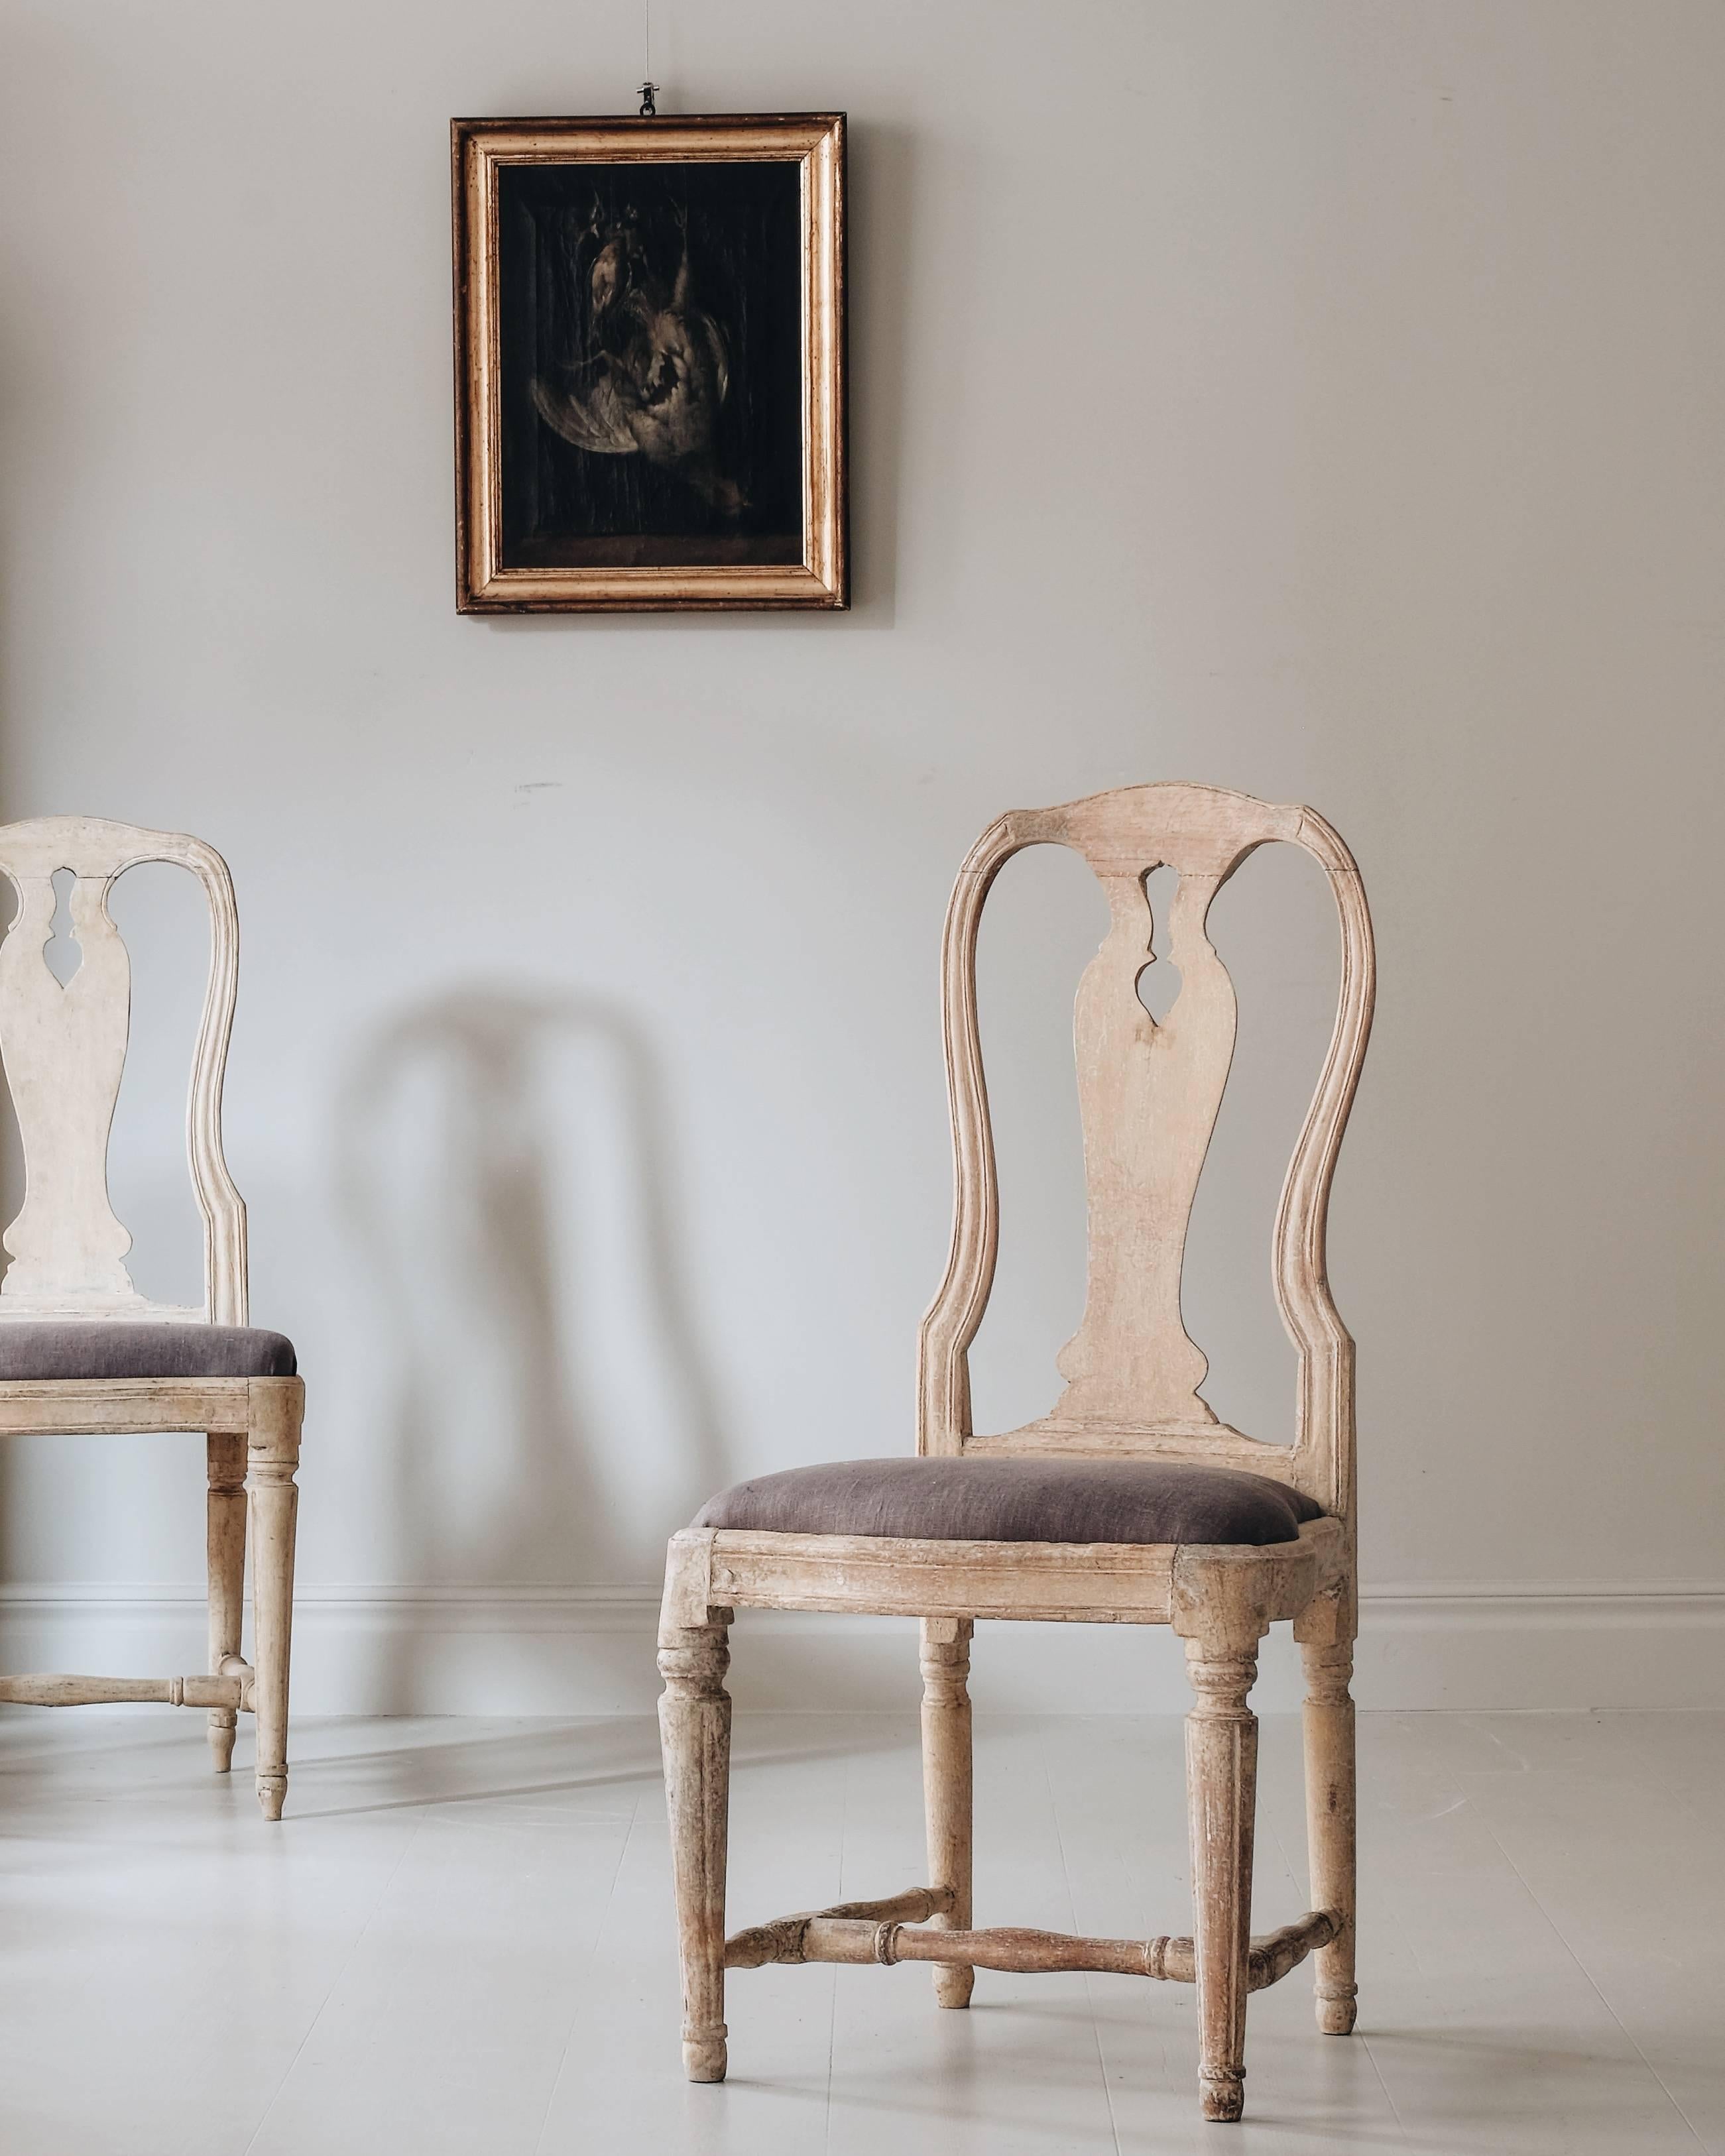 Remarkable and rare set of twelve 18th century matched transitional Rococo - Gustavian dining chairs in original colour. Ca 1775, Stockholm Sweden.

The rococo back with it’s curved crest, uprights and elegant baluster splat, combined with the